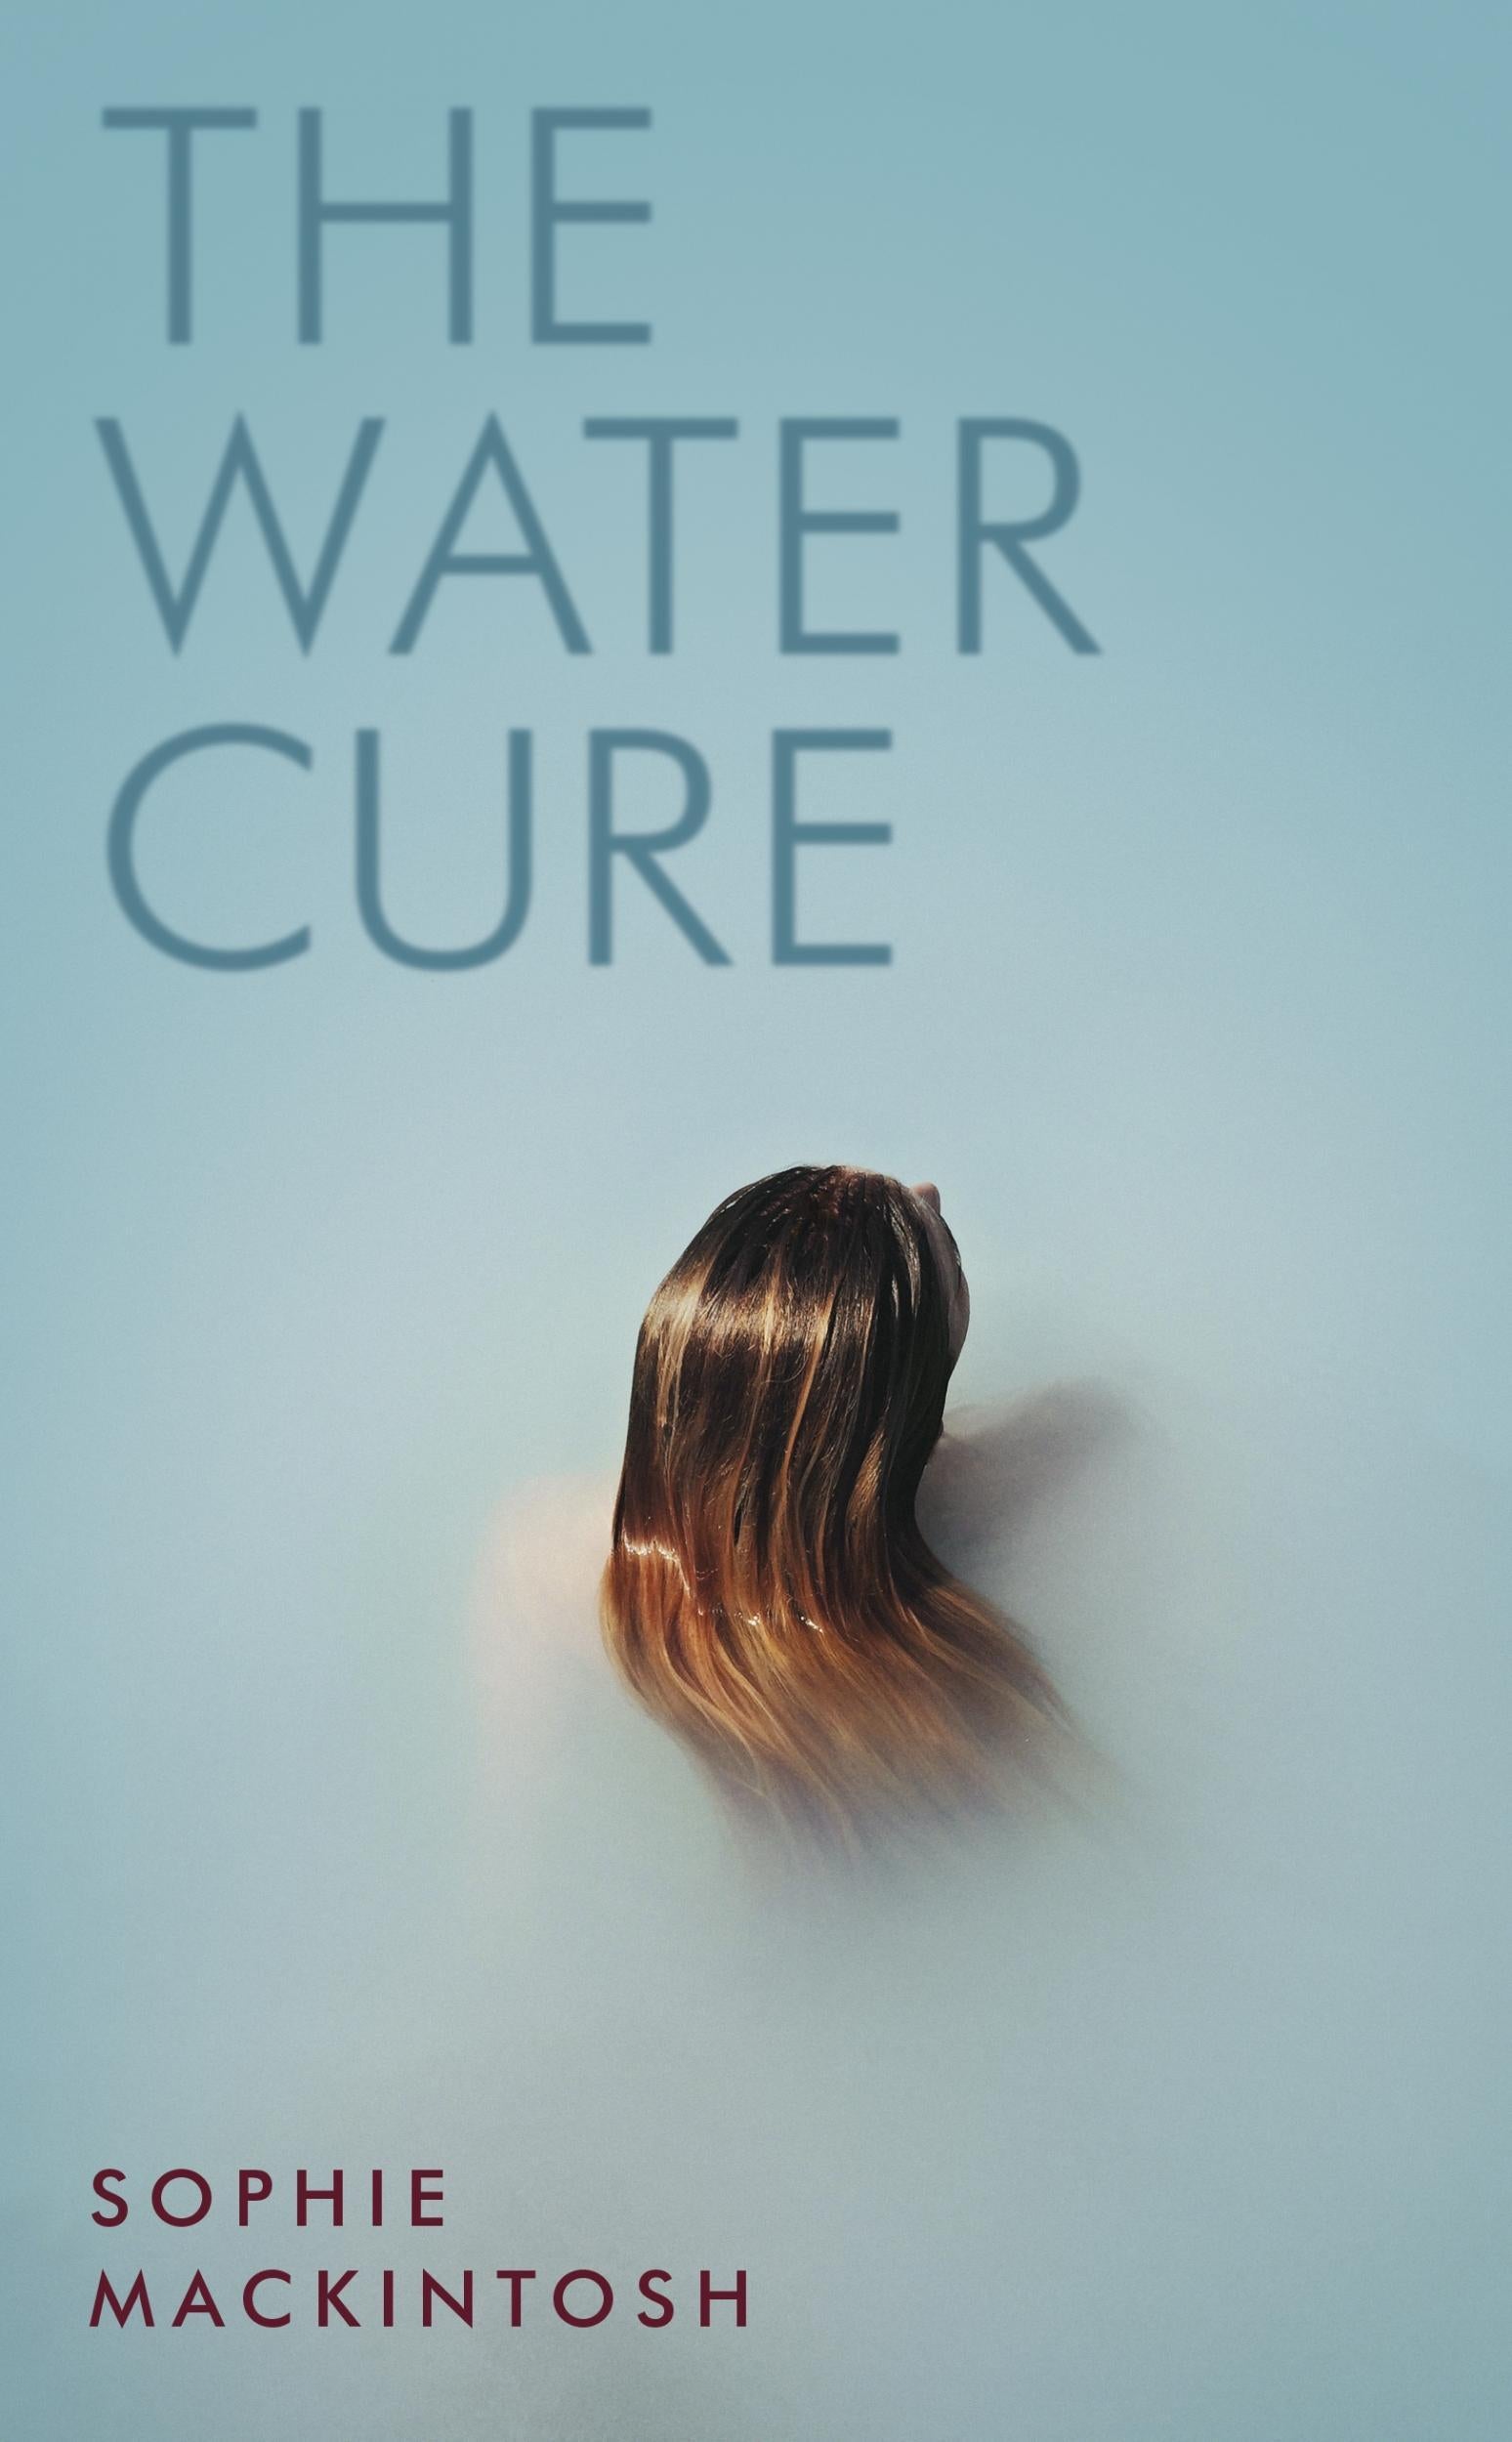 ‘The Water Cure’ was long-listed for the Man Booker prize in 2018